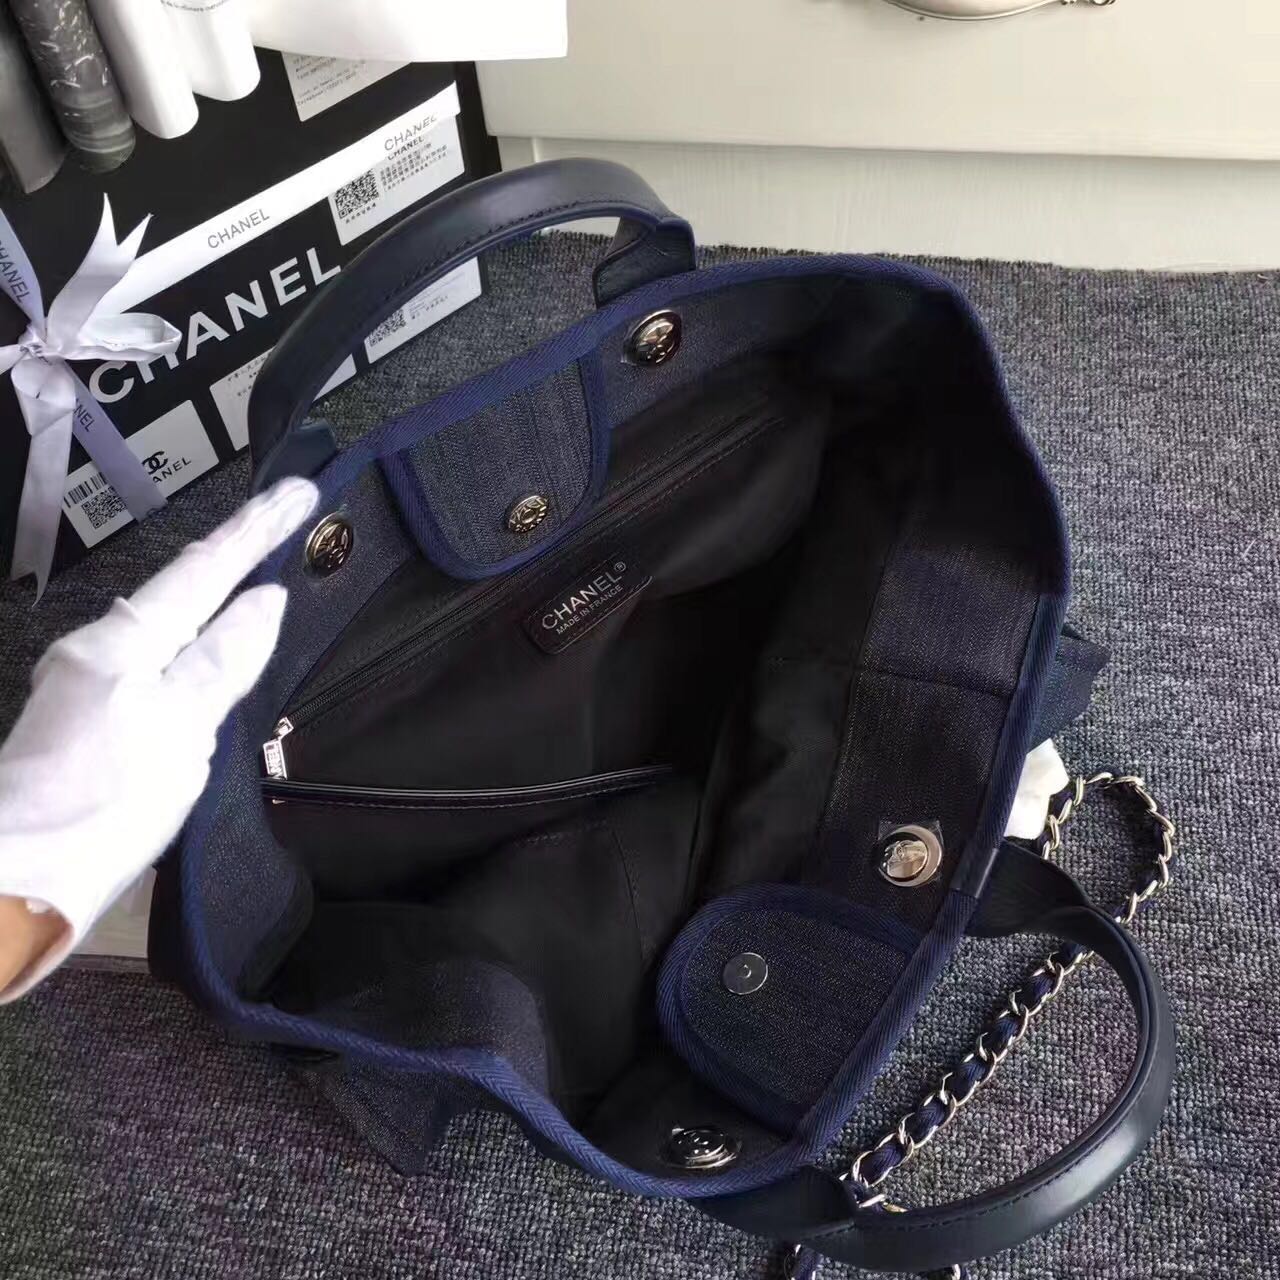 Chanel Canvas Leather Tote Shopping Bag Dark Blue A1679